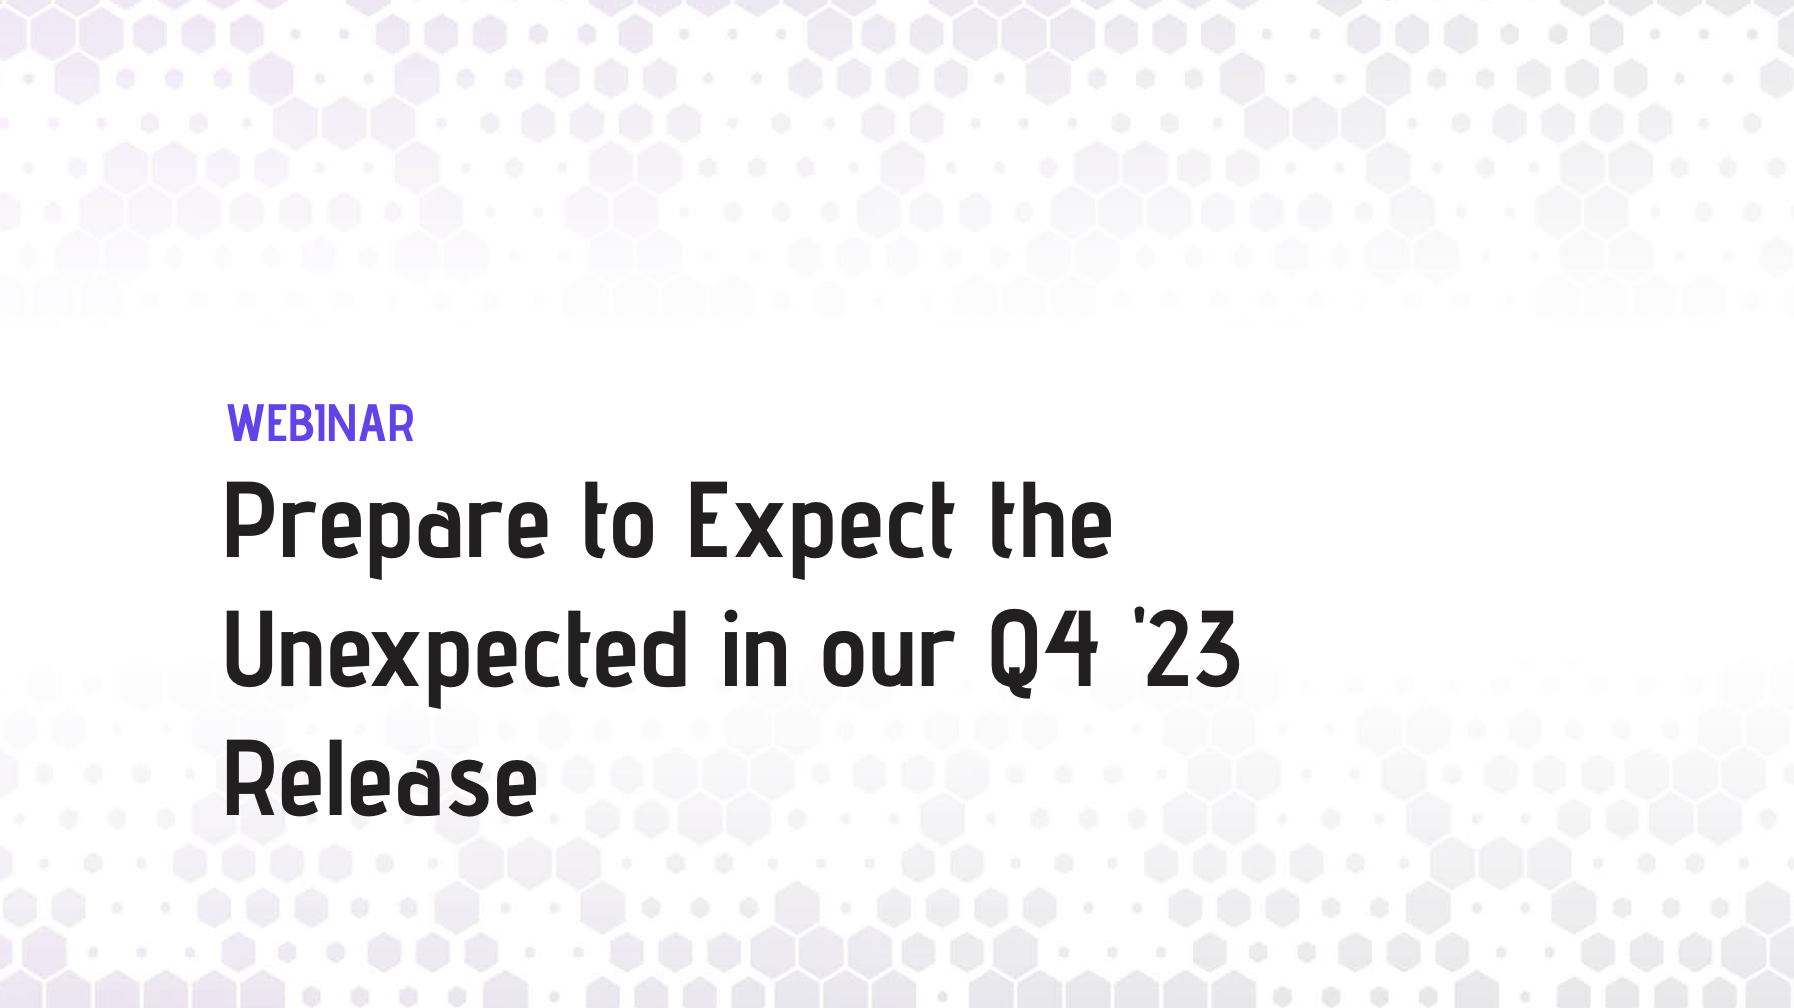 Prepare to Expect the Unexpected in our Q4 '23 Release